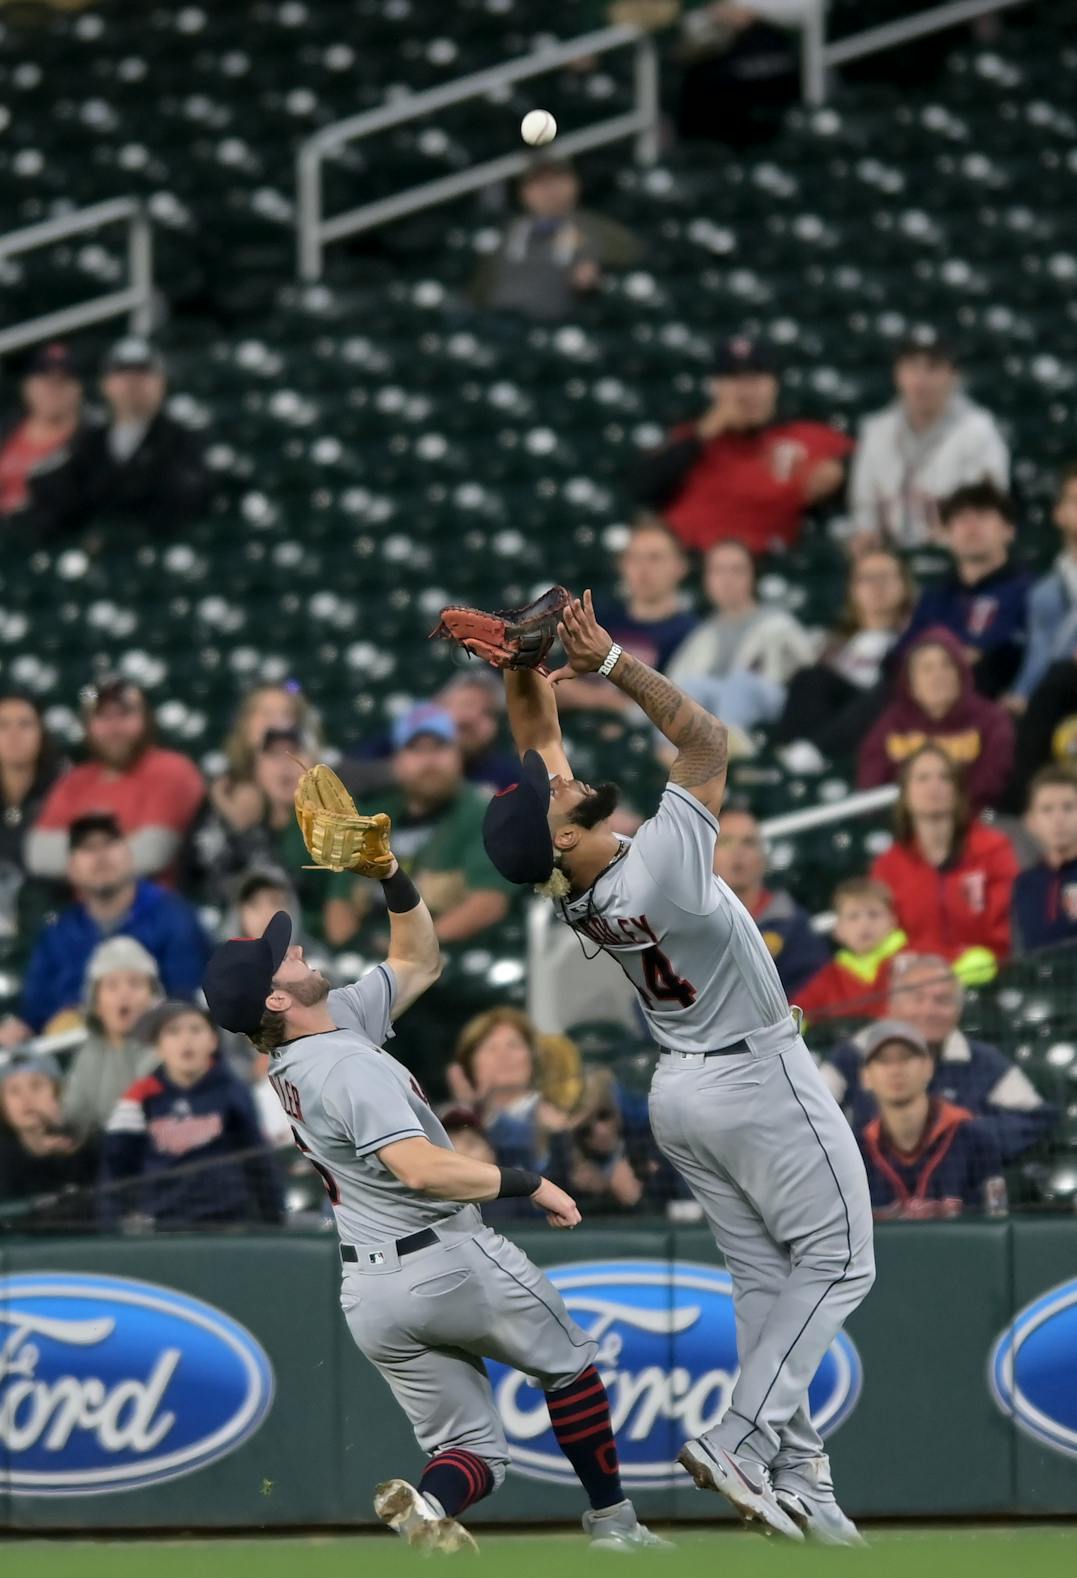 Joe Ryan apologizes after injury scare; Twins split with Cleveland